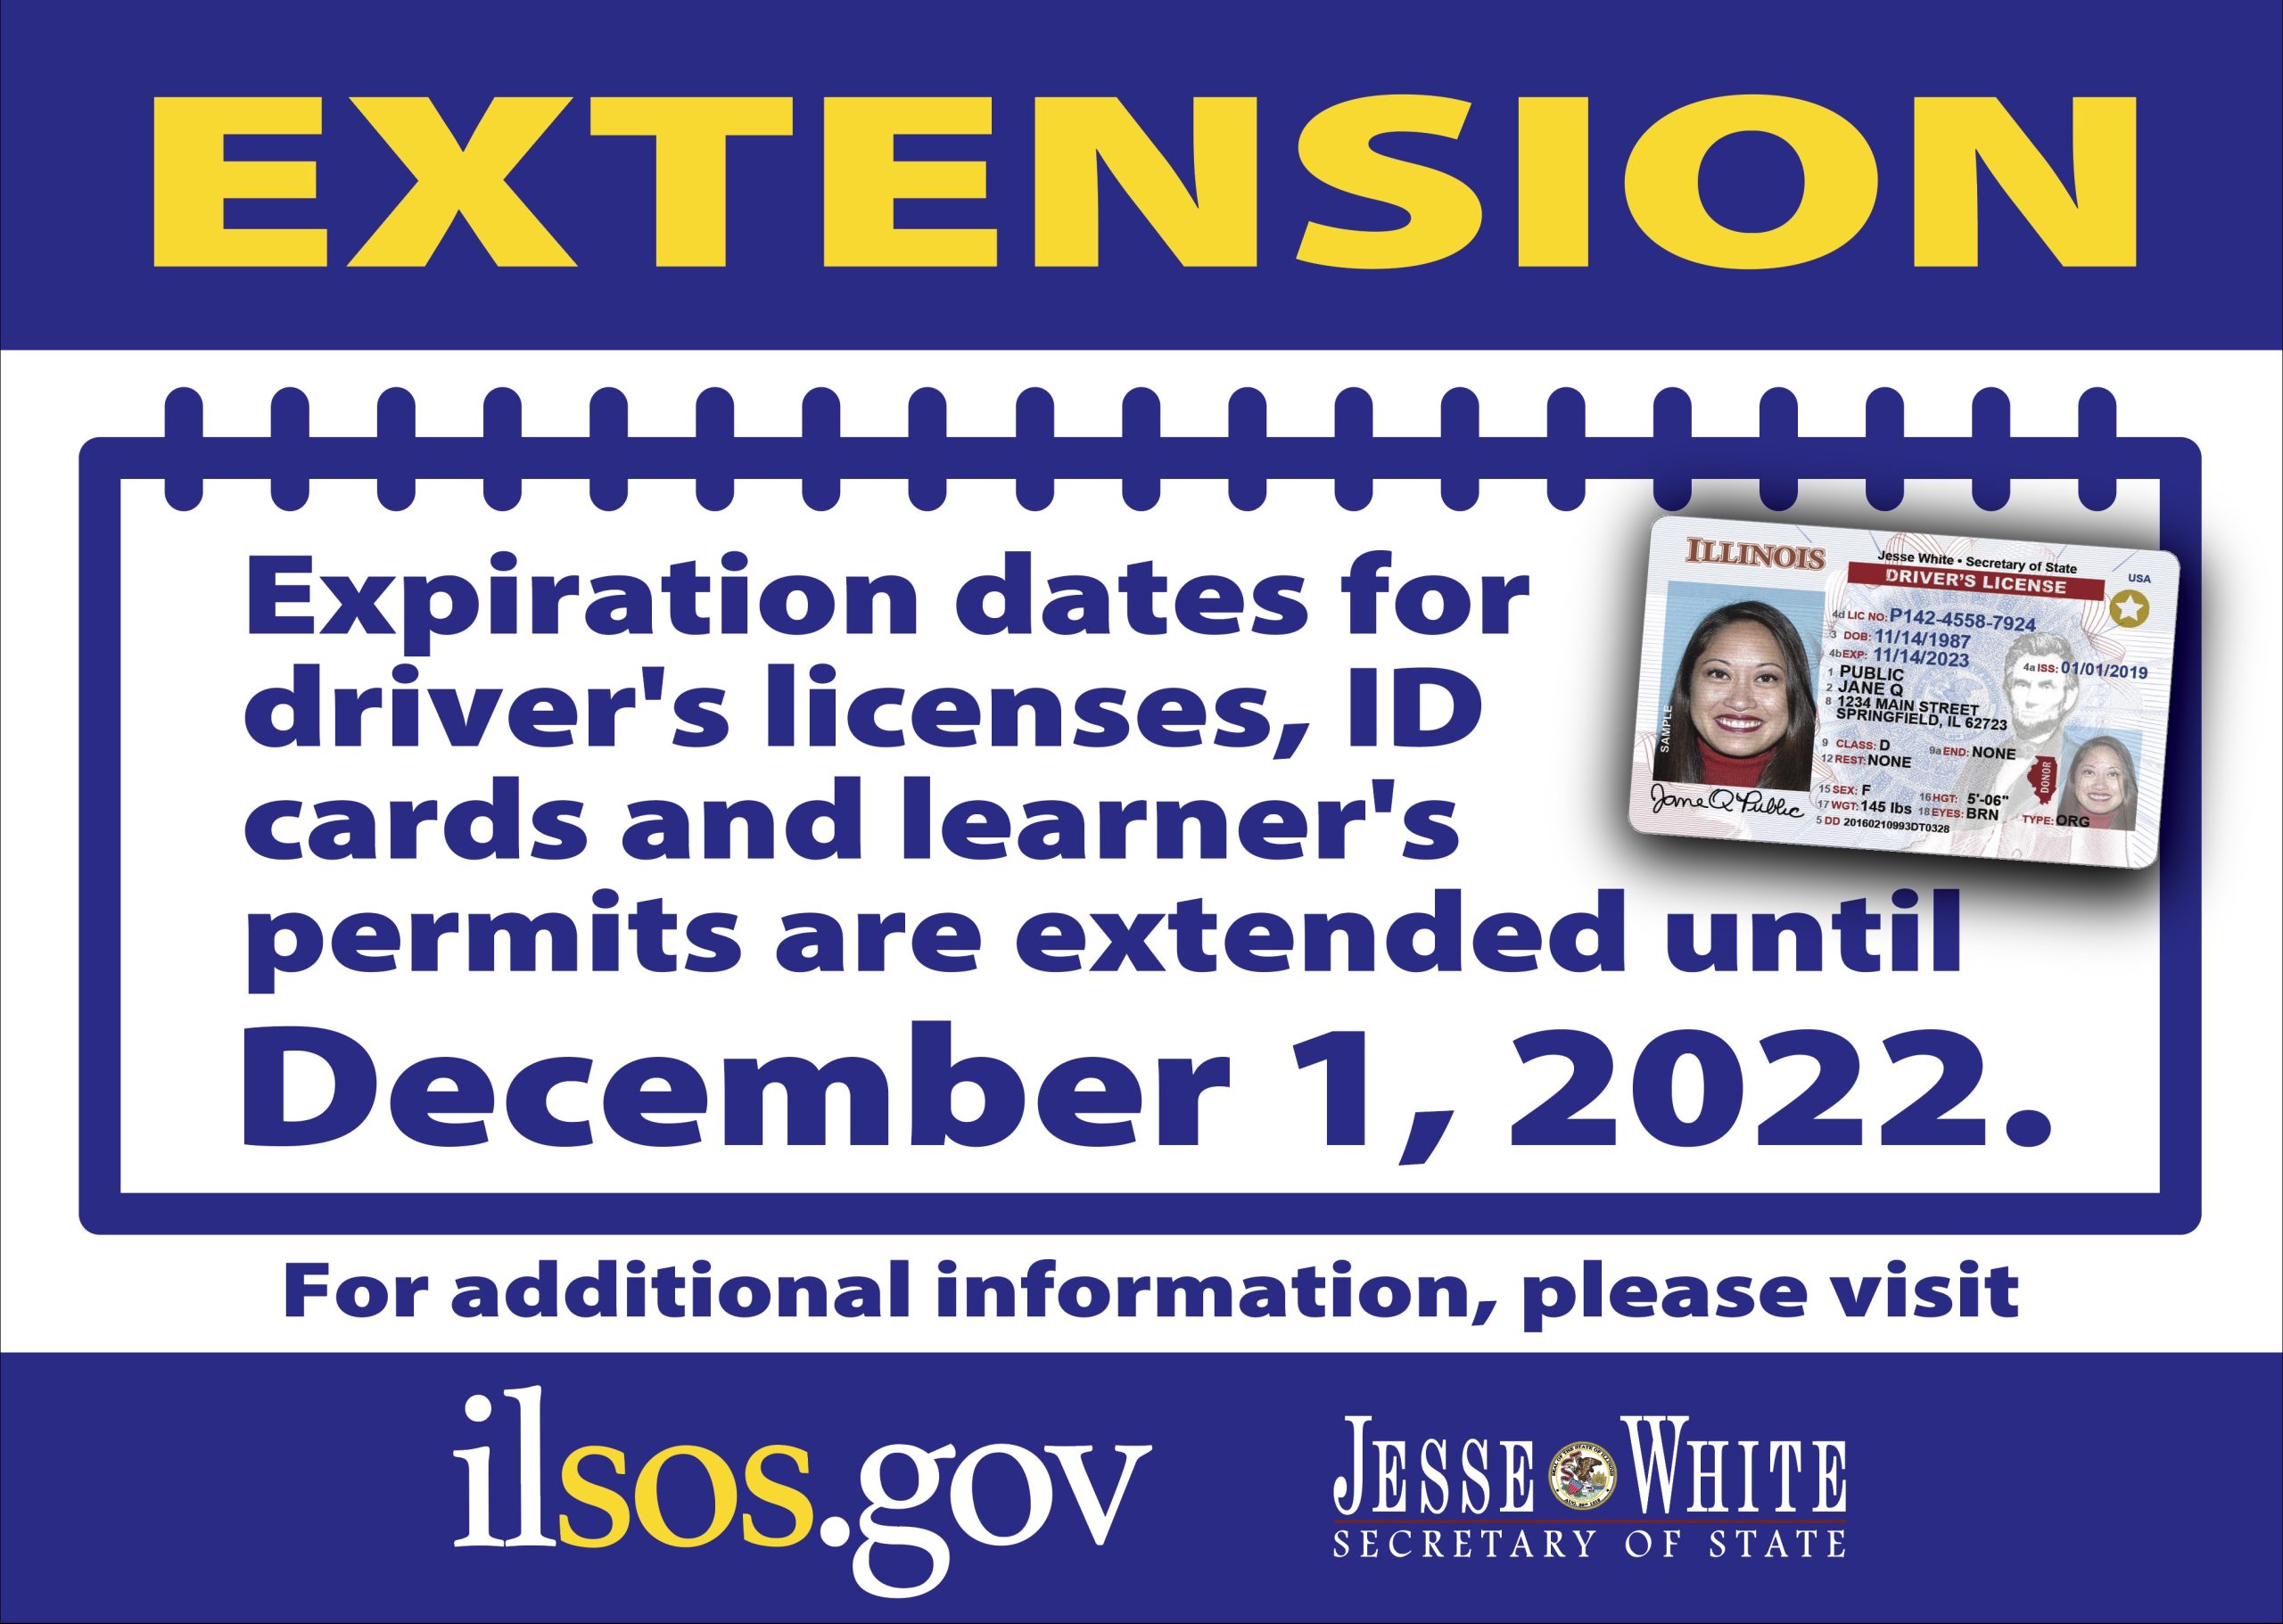 SOS Extends License Expiration Dates to December pic